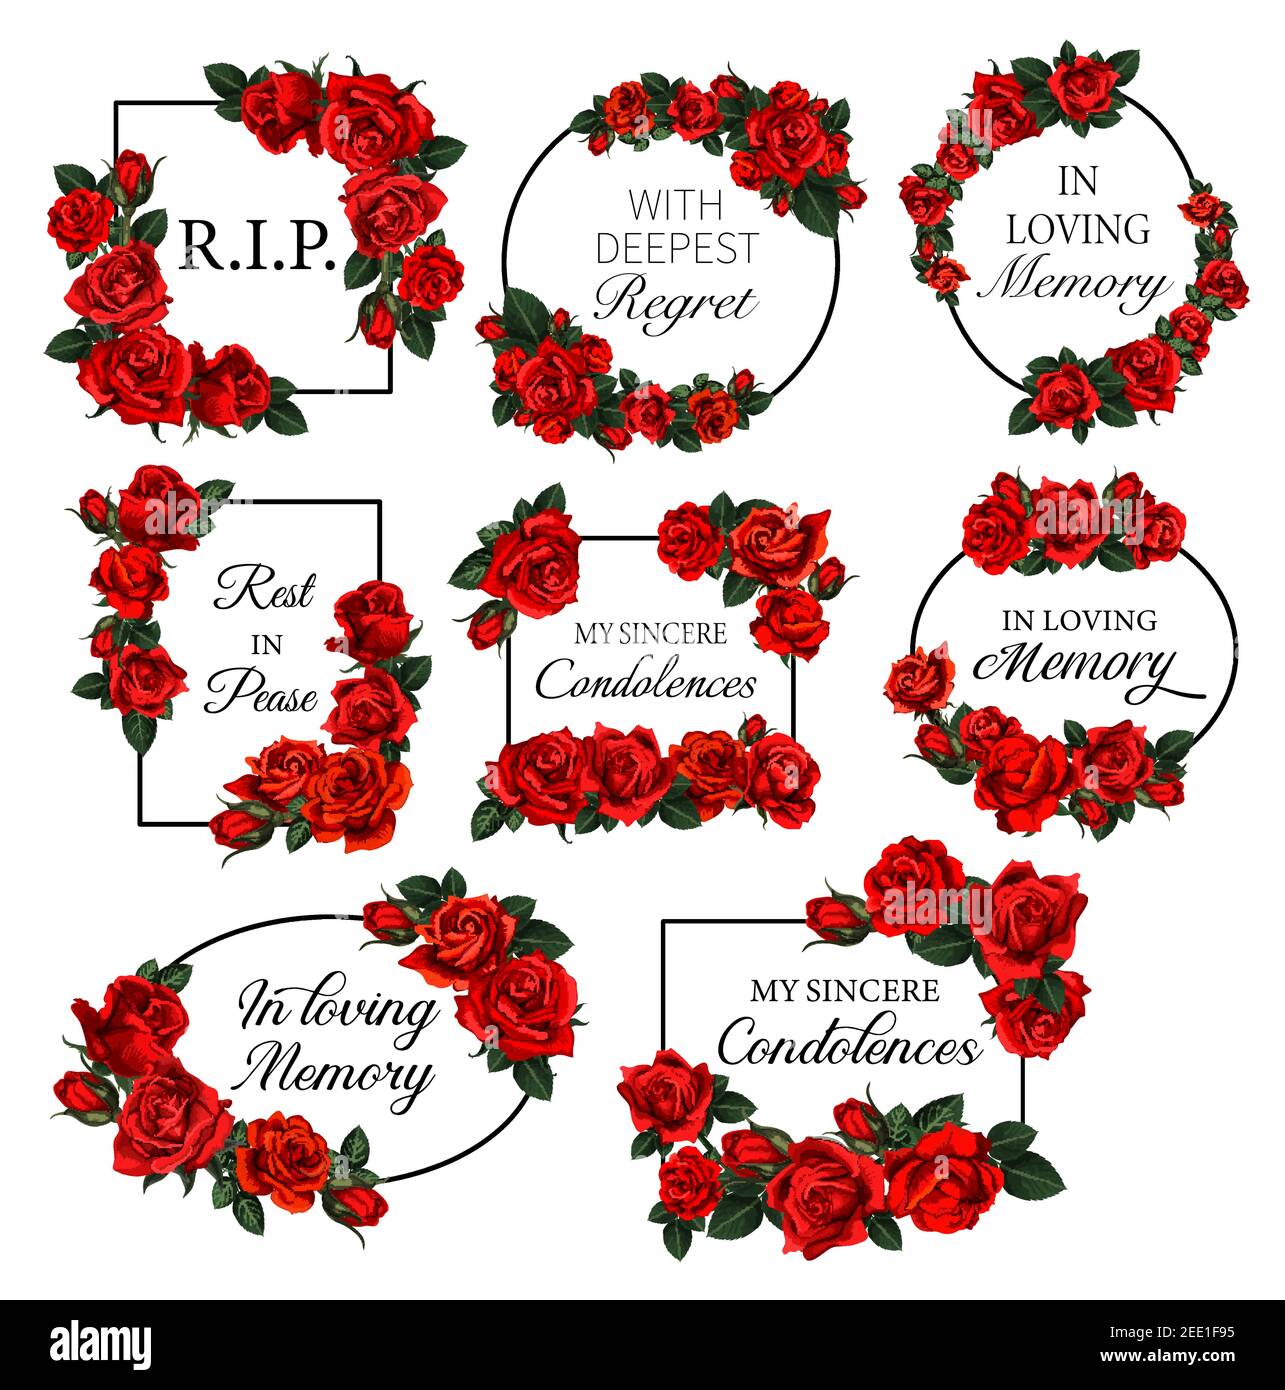 Funereal frames with red roses flowers. Obituary vector round and square frames with RIP res in peace, in loving memory condolences and engraved flowe Stock Vector